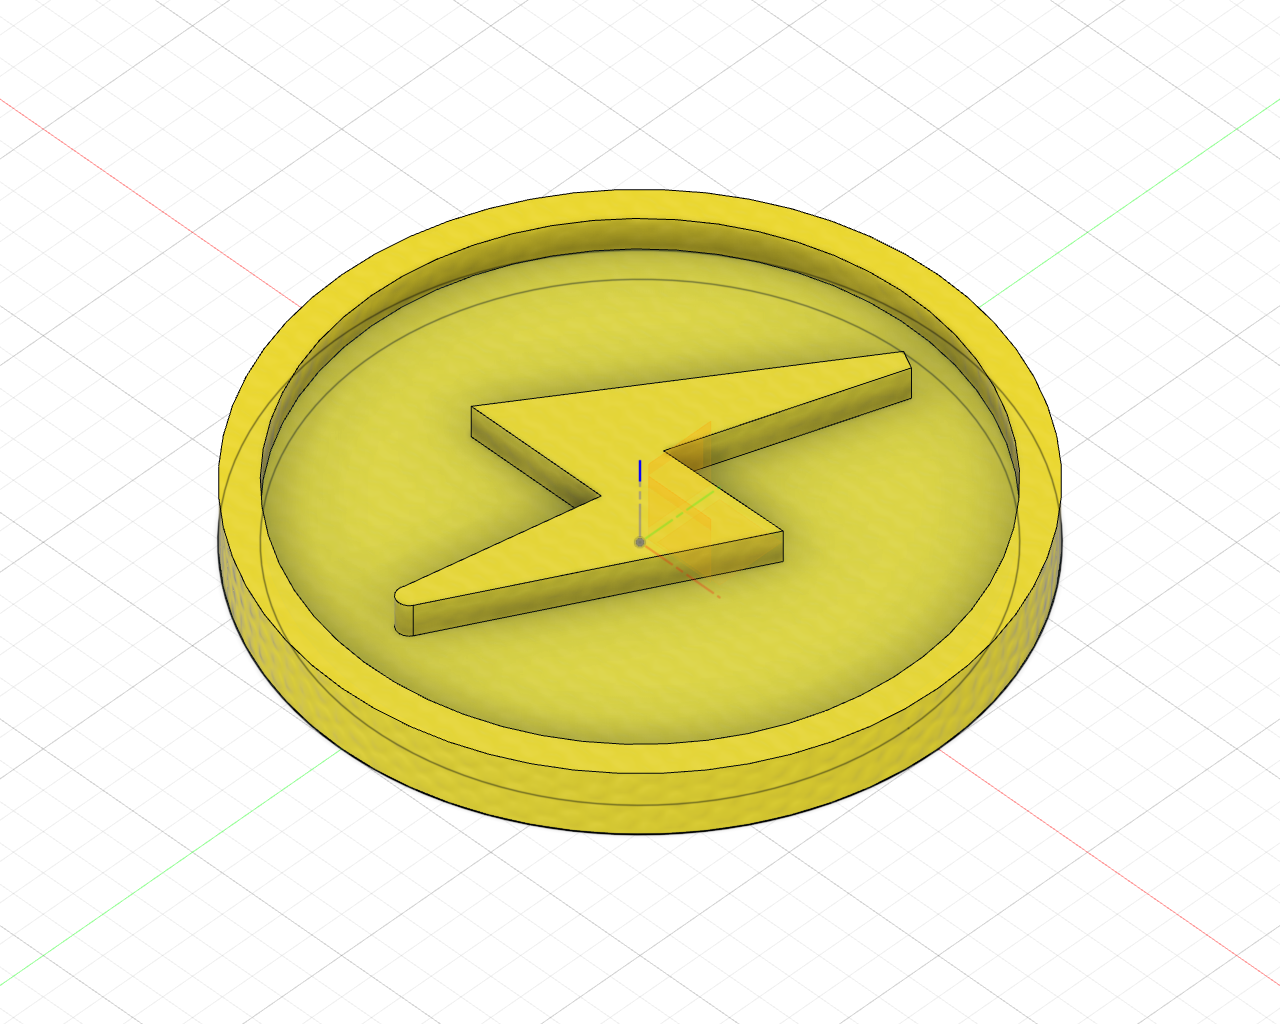 Board game power token v3 pic 1.png